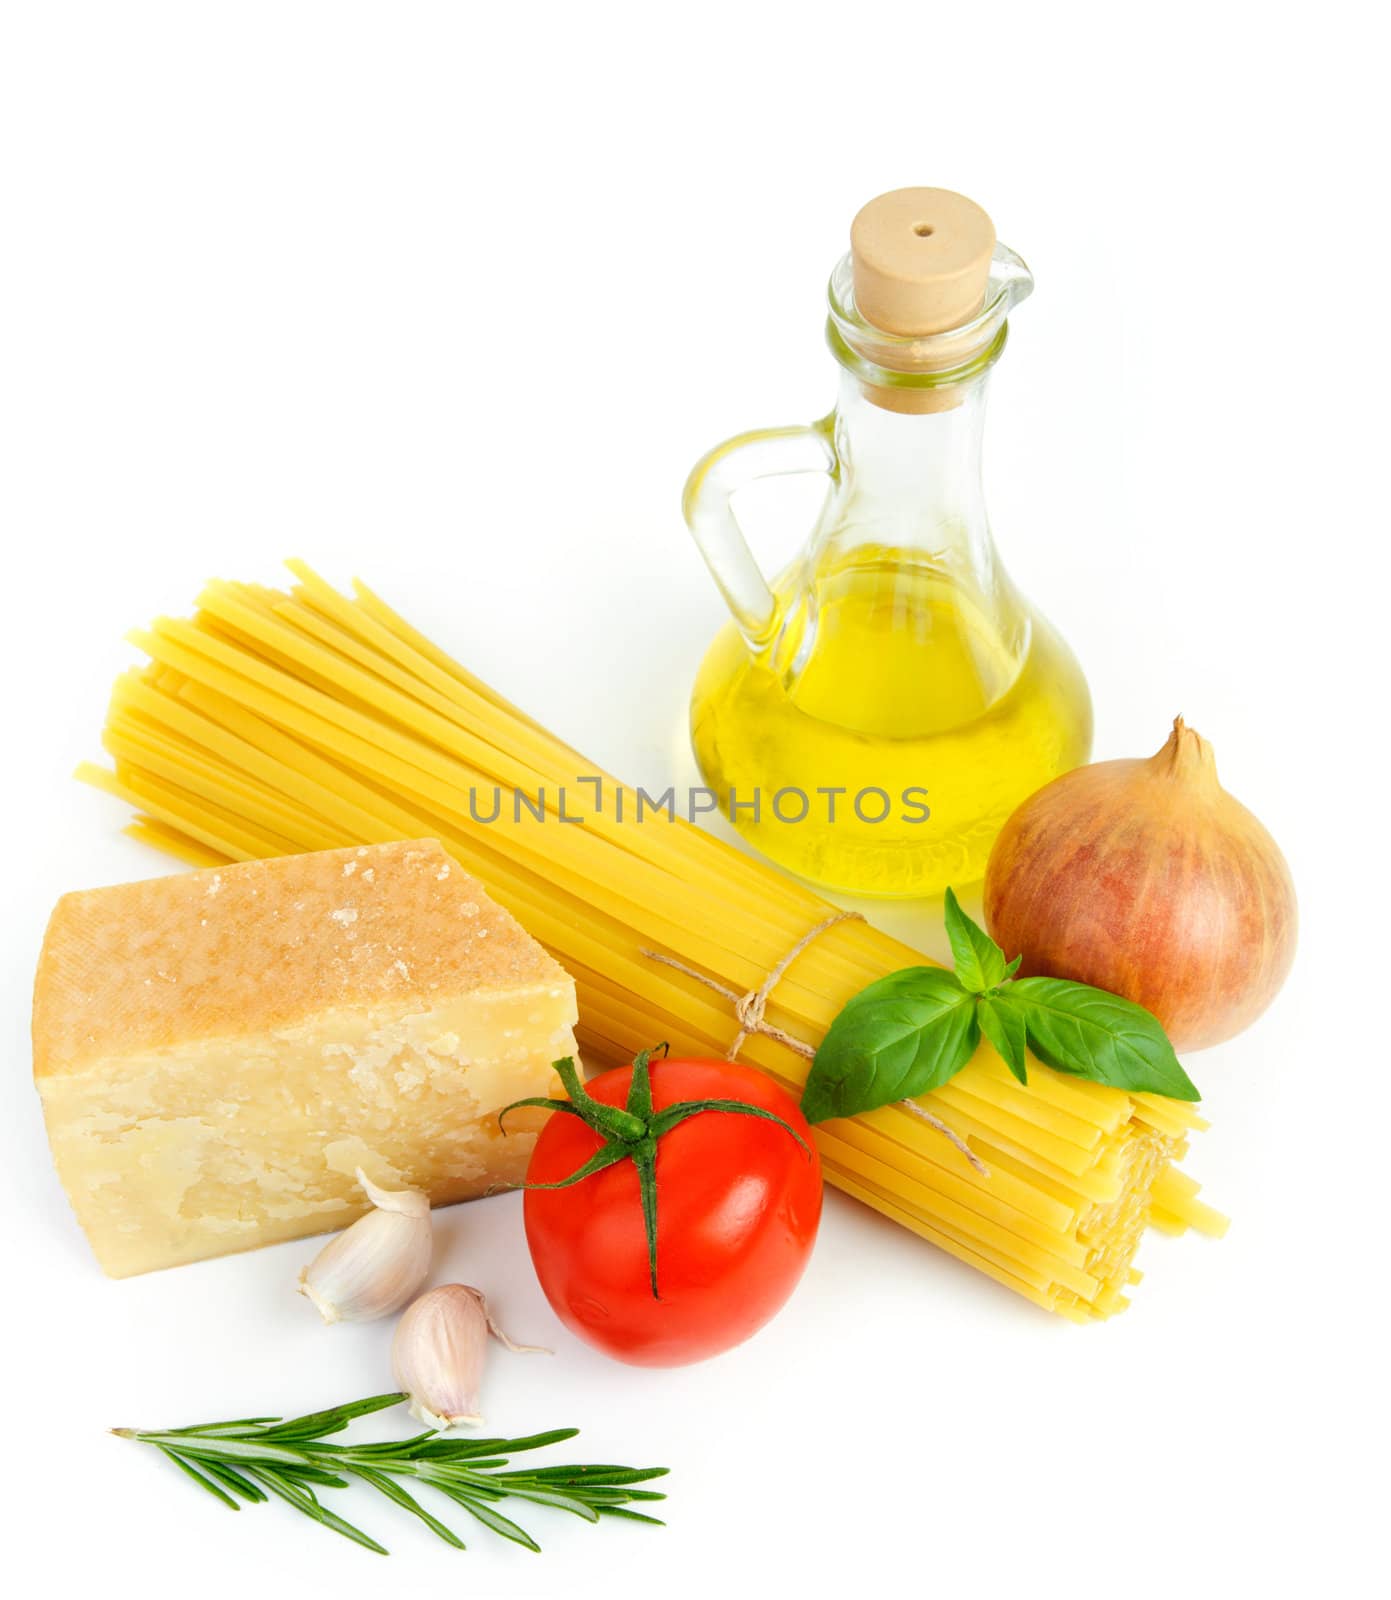 Close up of basic ingredients for italian pasta